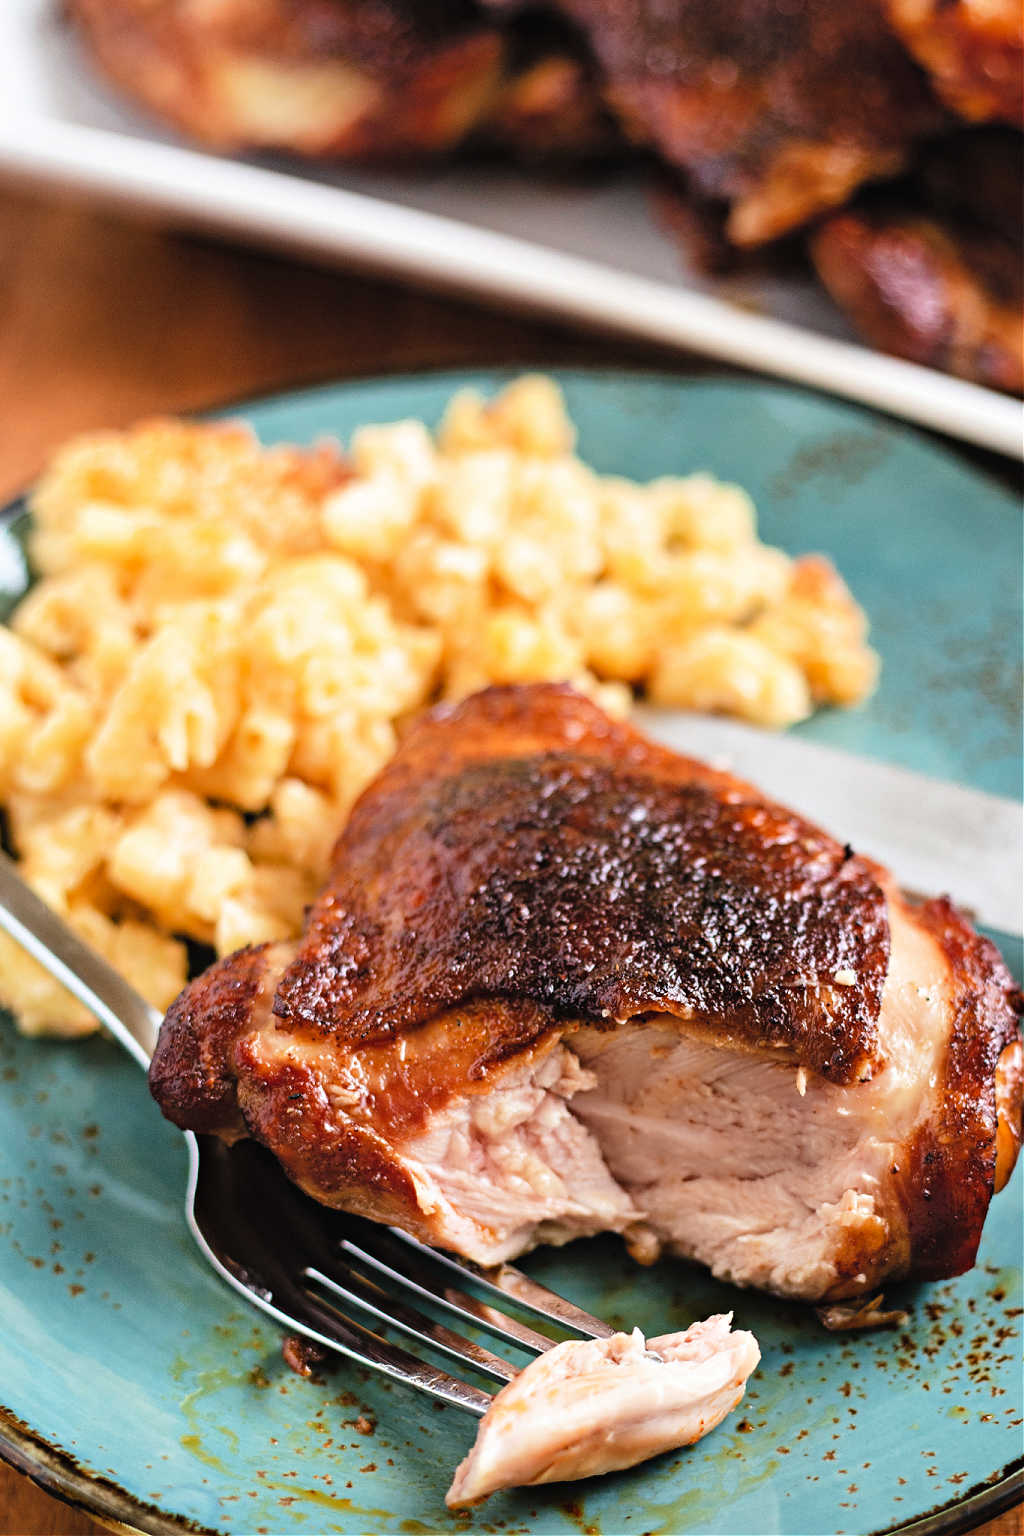 smoked chicken thigh on a blue plate with mac and cheese.